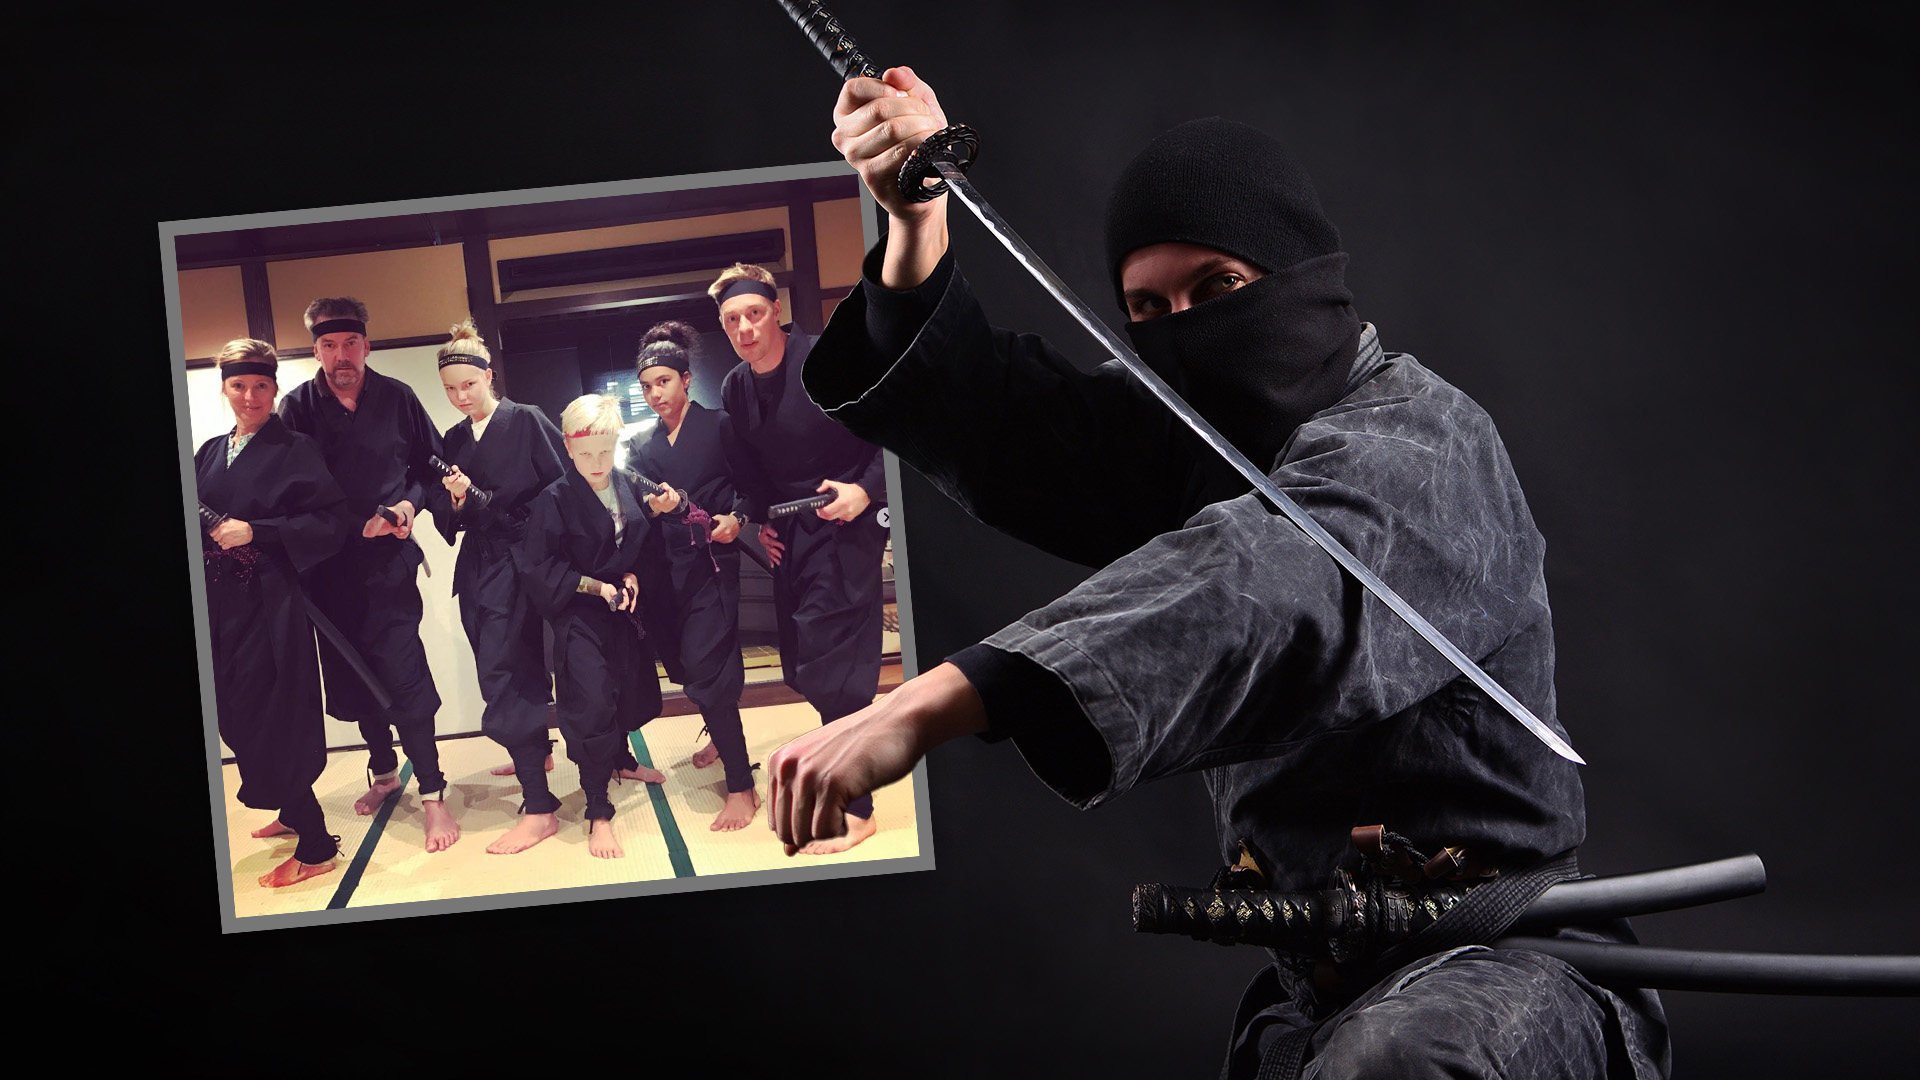 Ninjas have garnered such immense worldwide fame that individuals from all corners of the globe dedicate themselves to rigorous training in order to master the intricate art of “ninjutsu”. Photo: SCMP composite/Shutterstock/Instagram